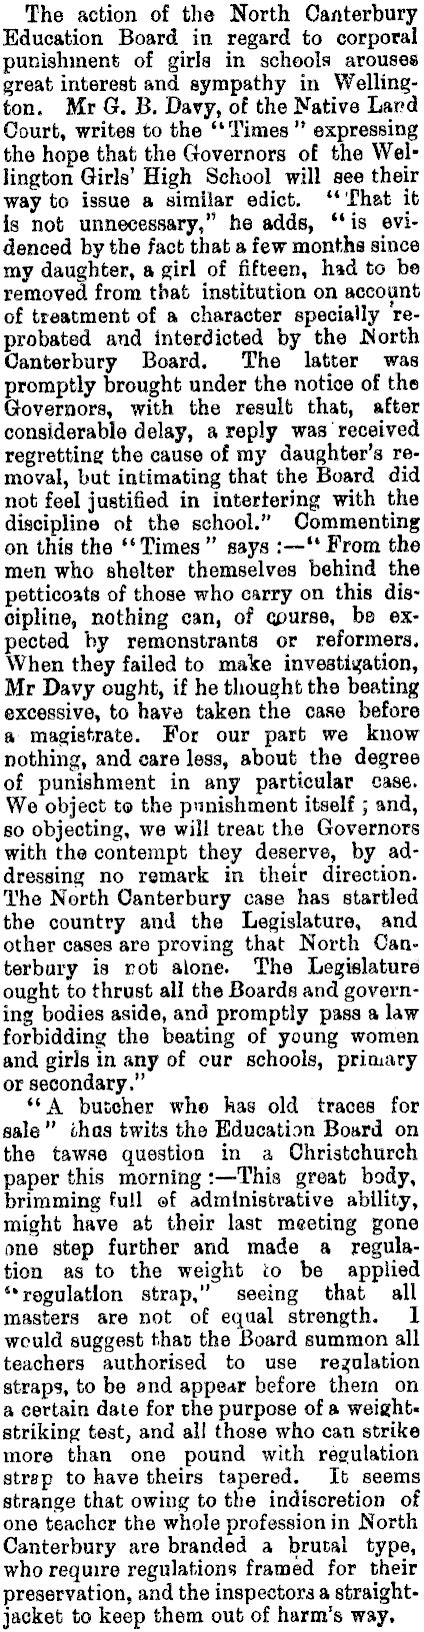 Papers Past Newspapers Ashburton Guardian 2 February 1894 Corporal Punishment